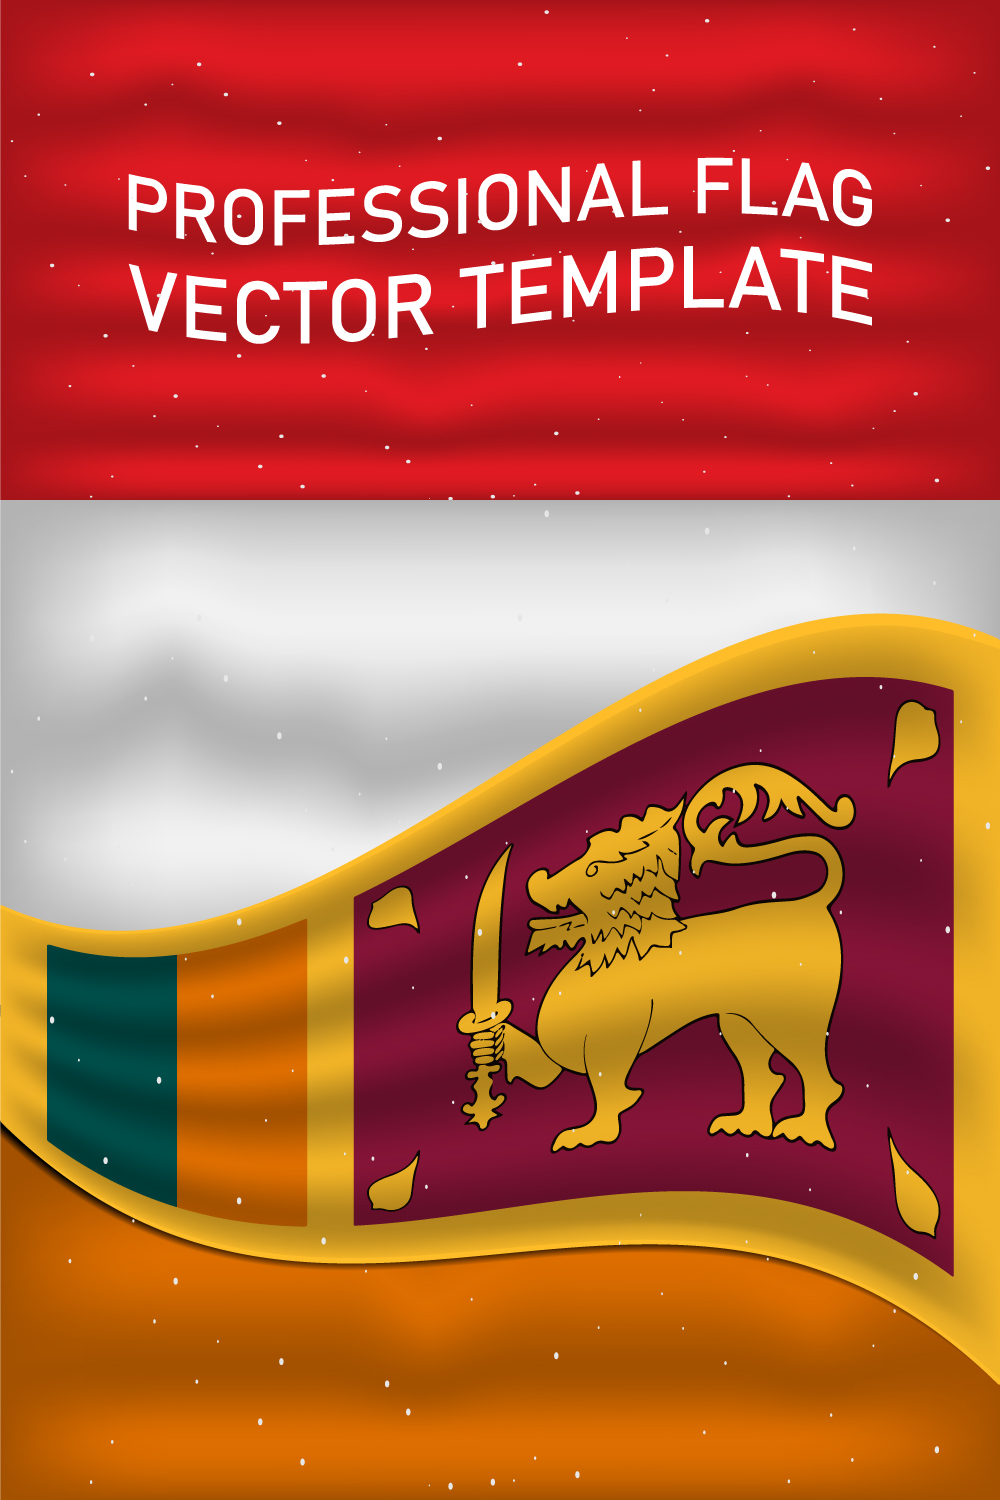 Magnificent image of the flag of Sri Lanka.